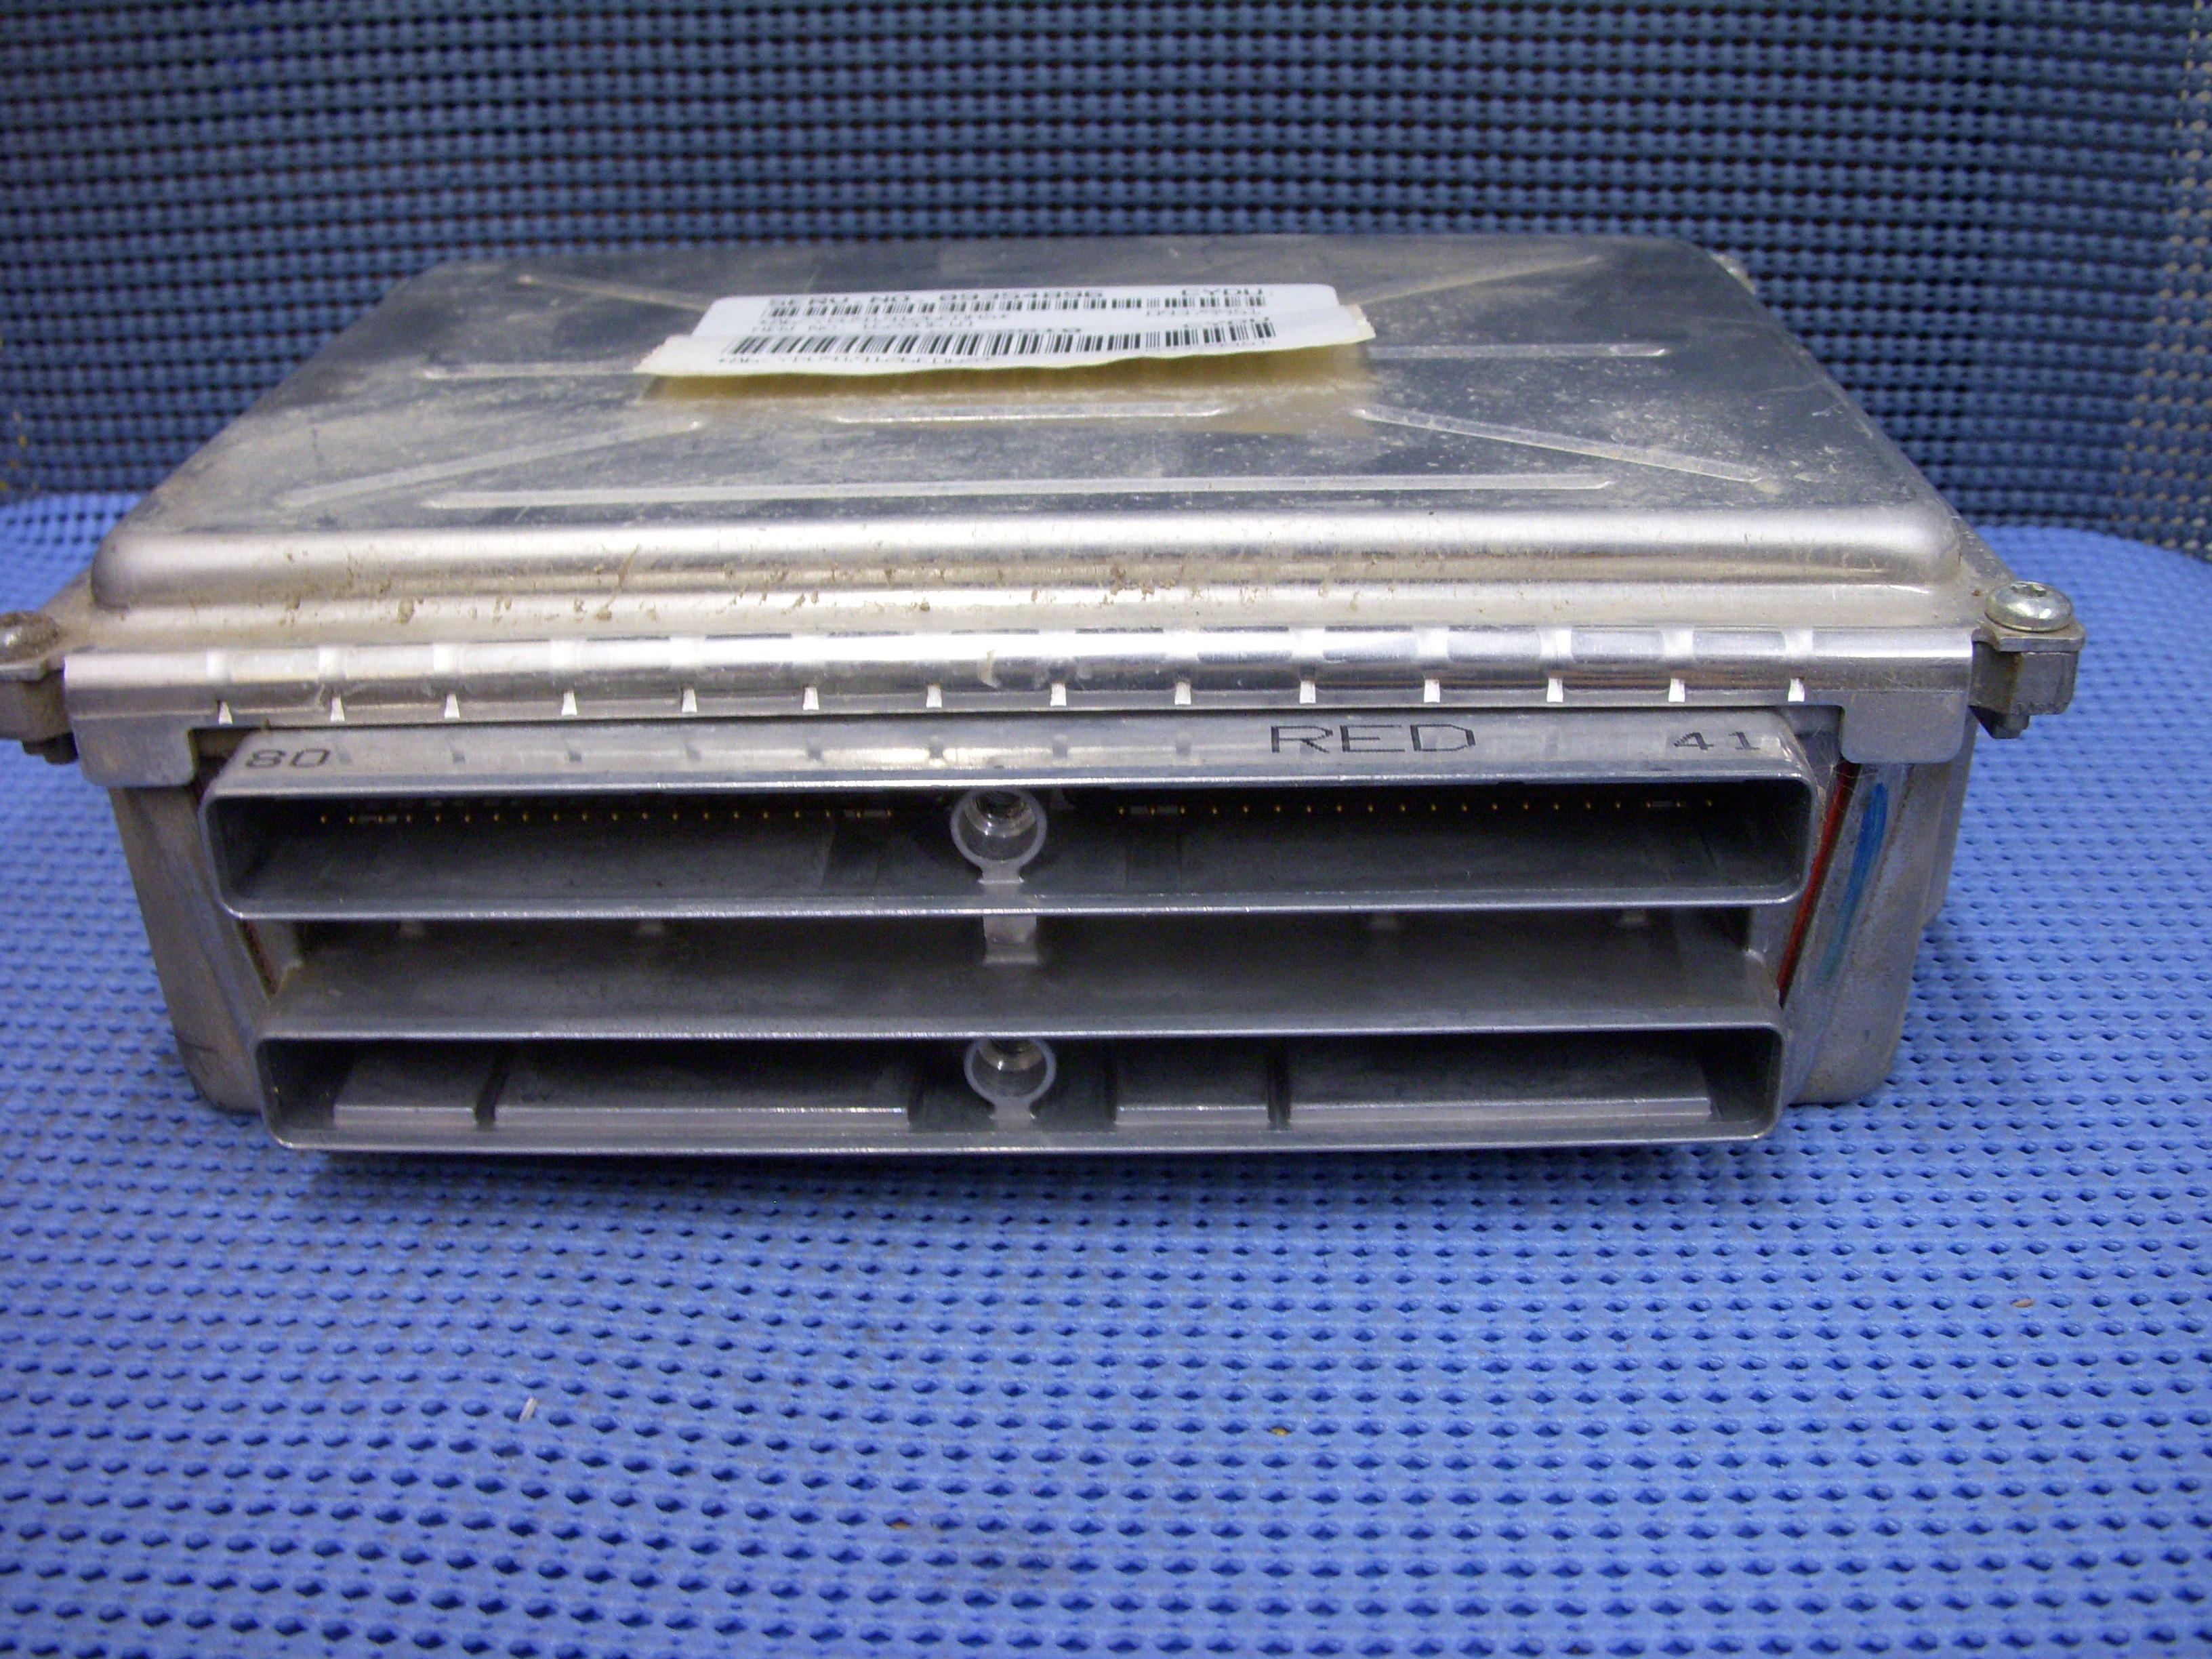 1999 - 2002 GM and GMC Engine Computer Module NOS # 9354896